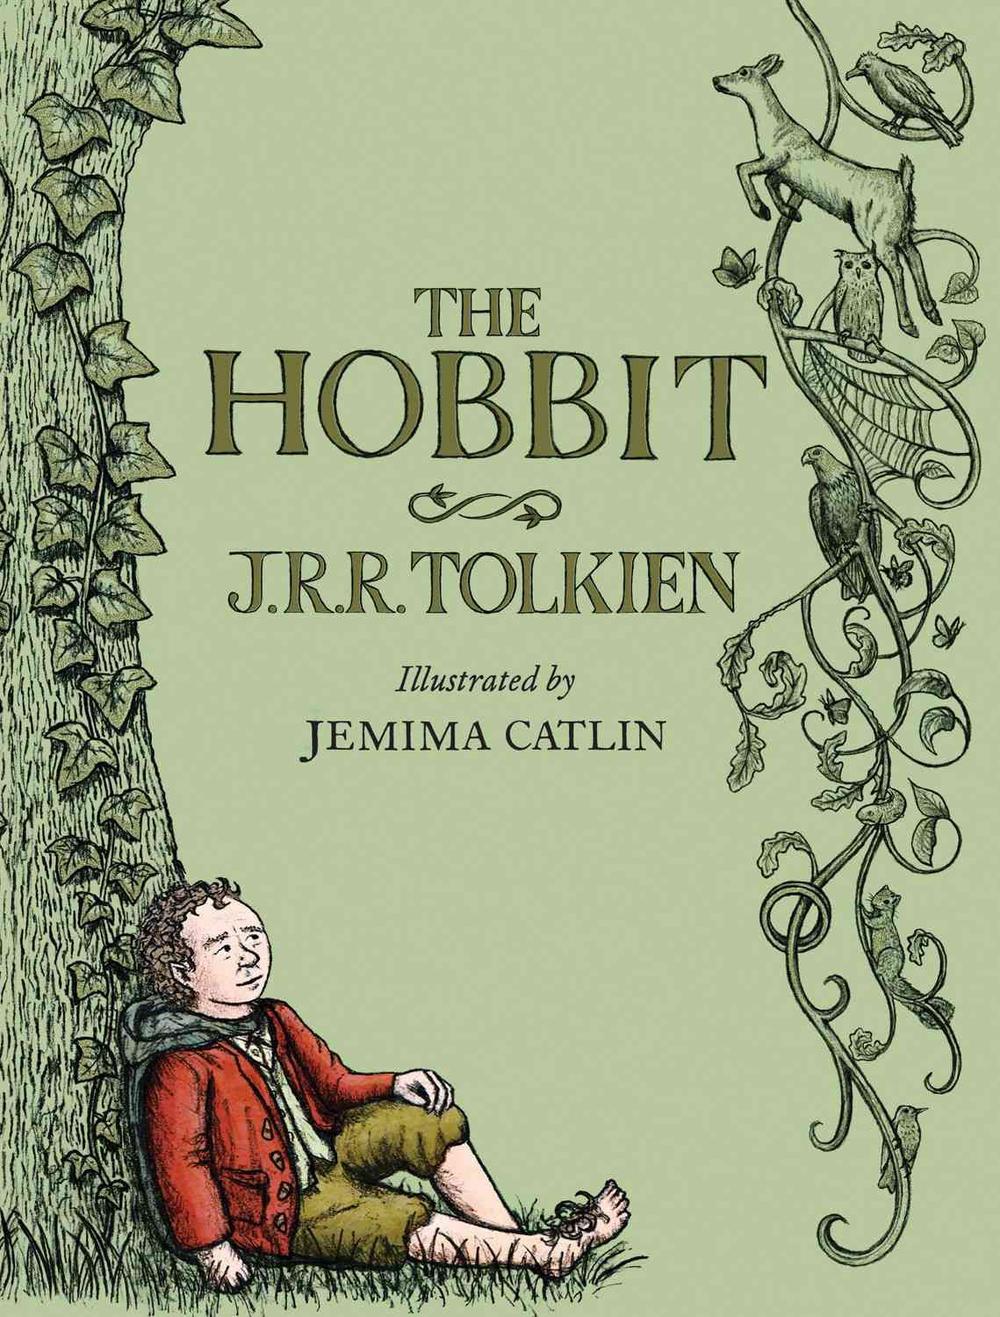 The Hobbit: Illustrated Edition by J.R.R. Tolkien (English) Hardcover Book Free | eBay